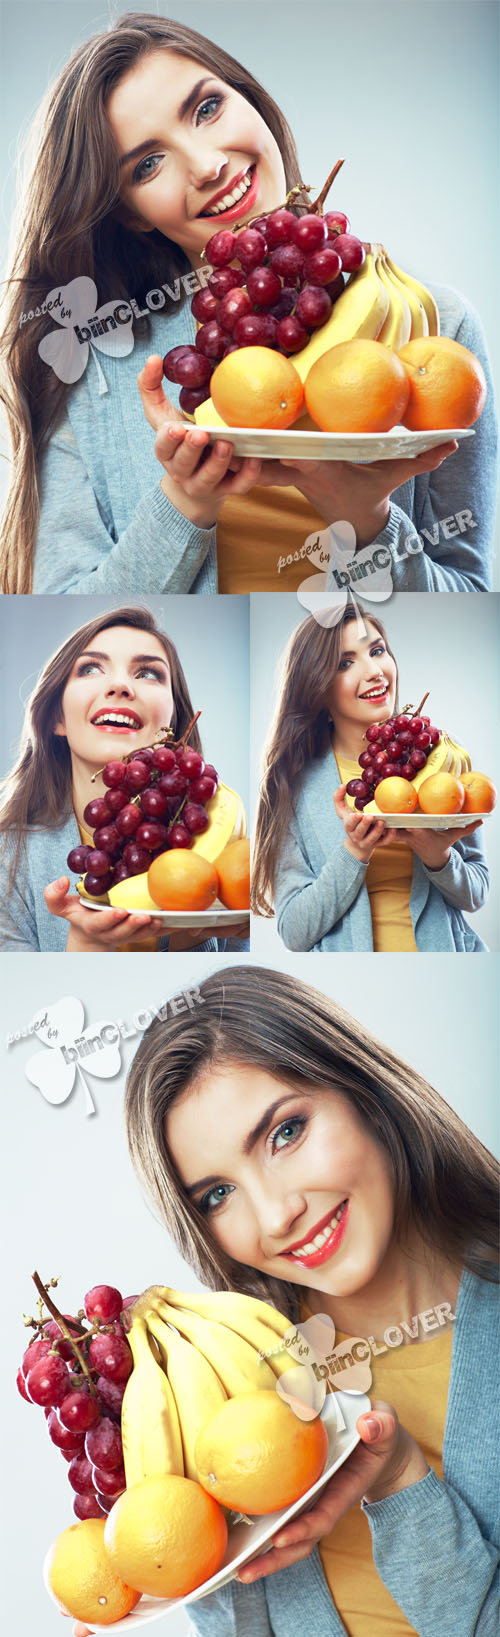 Woman with fresh fruit 0406